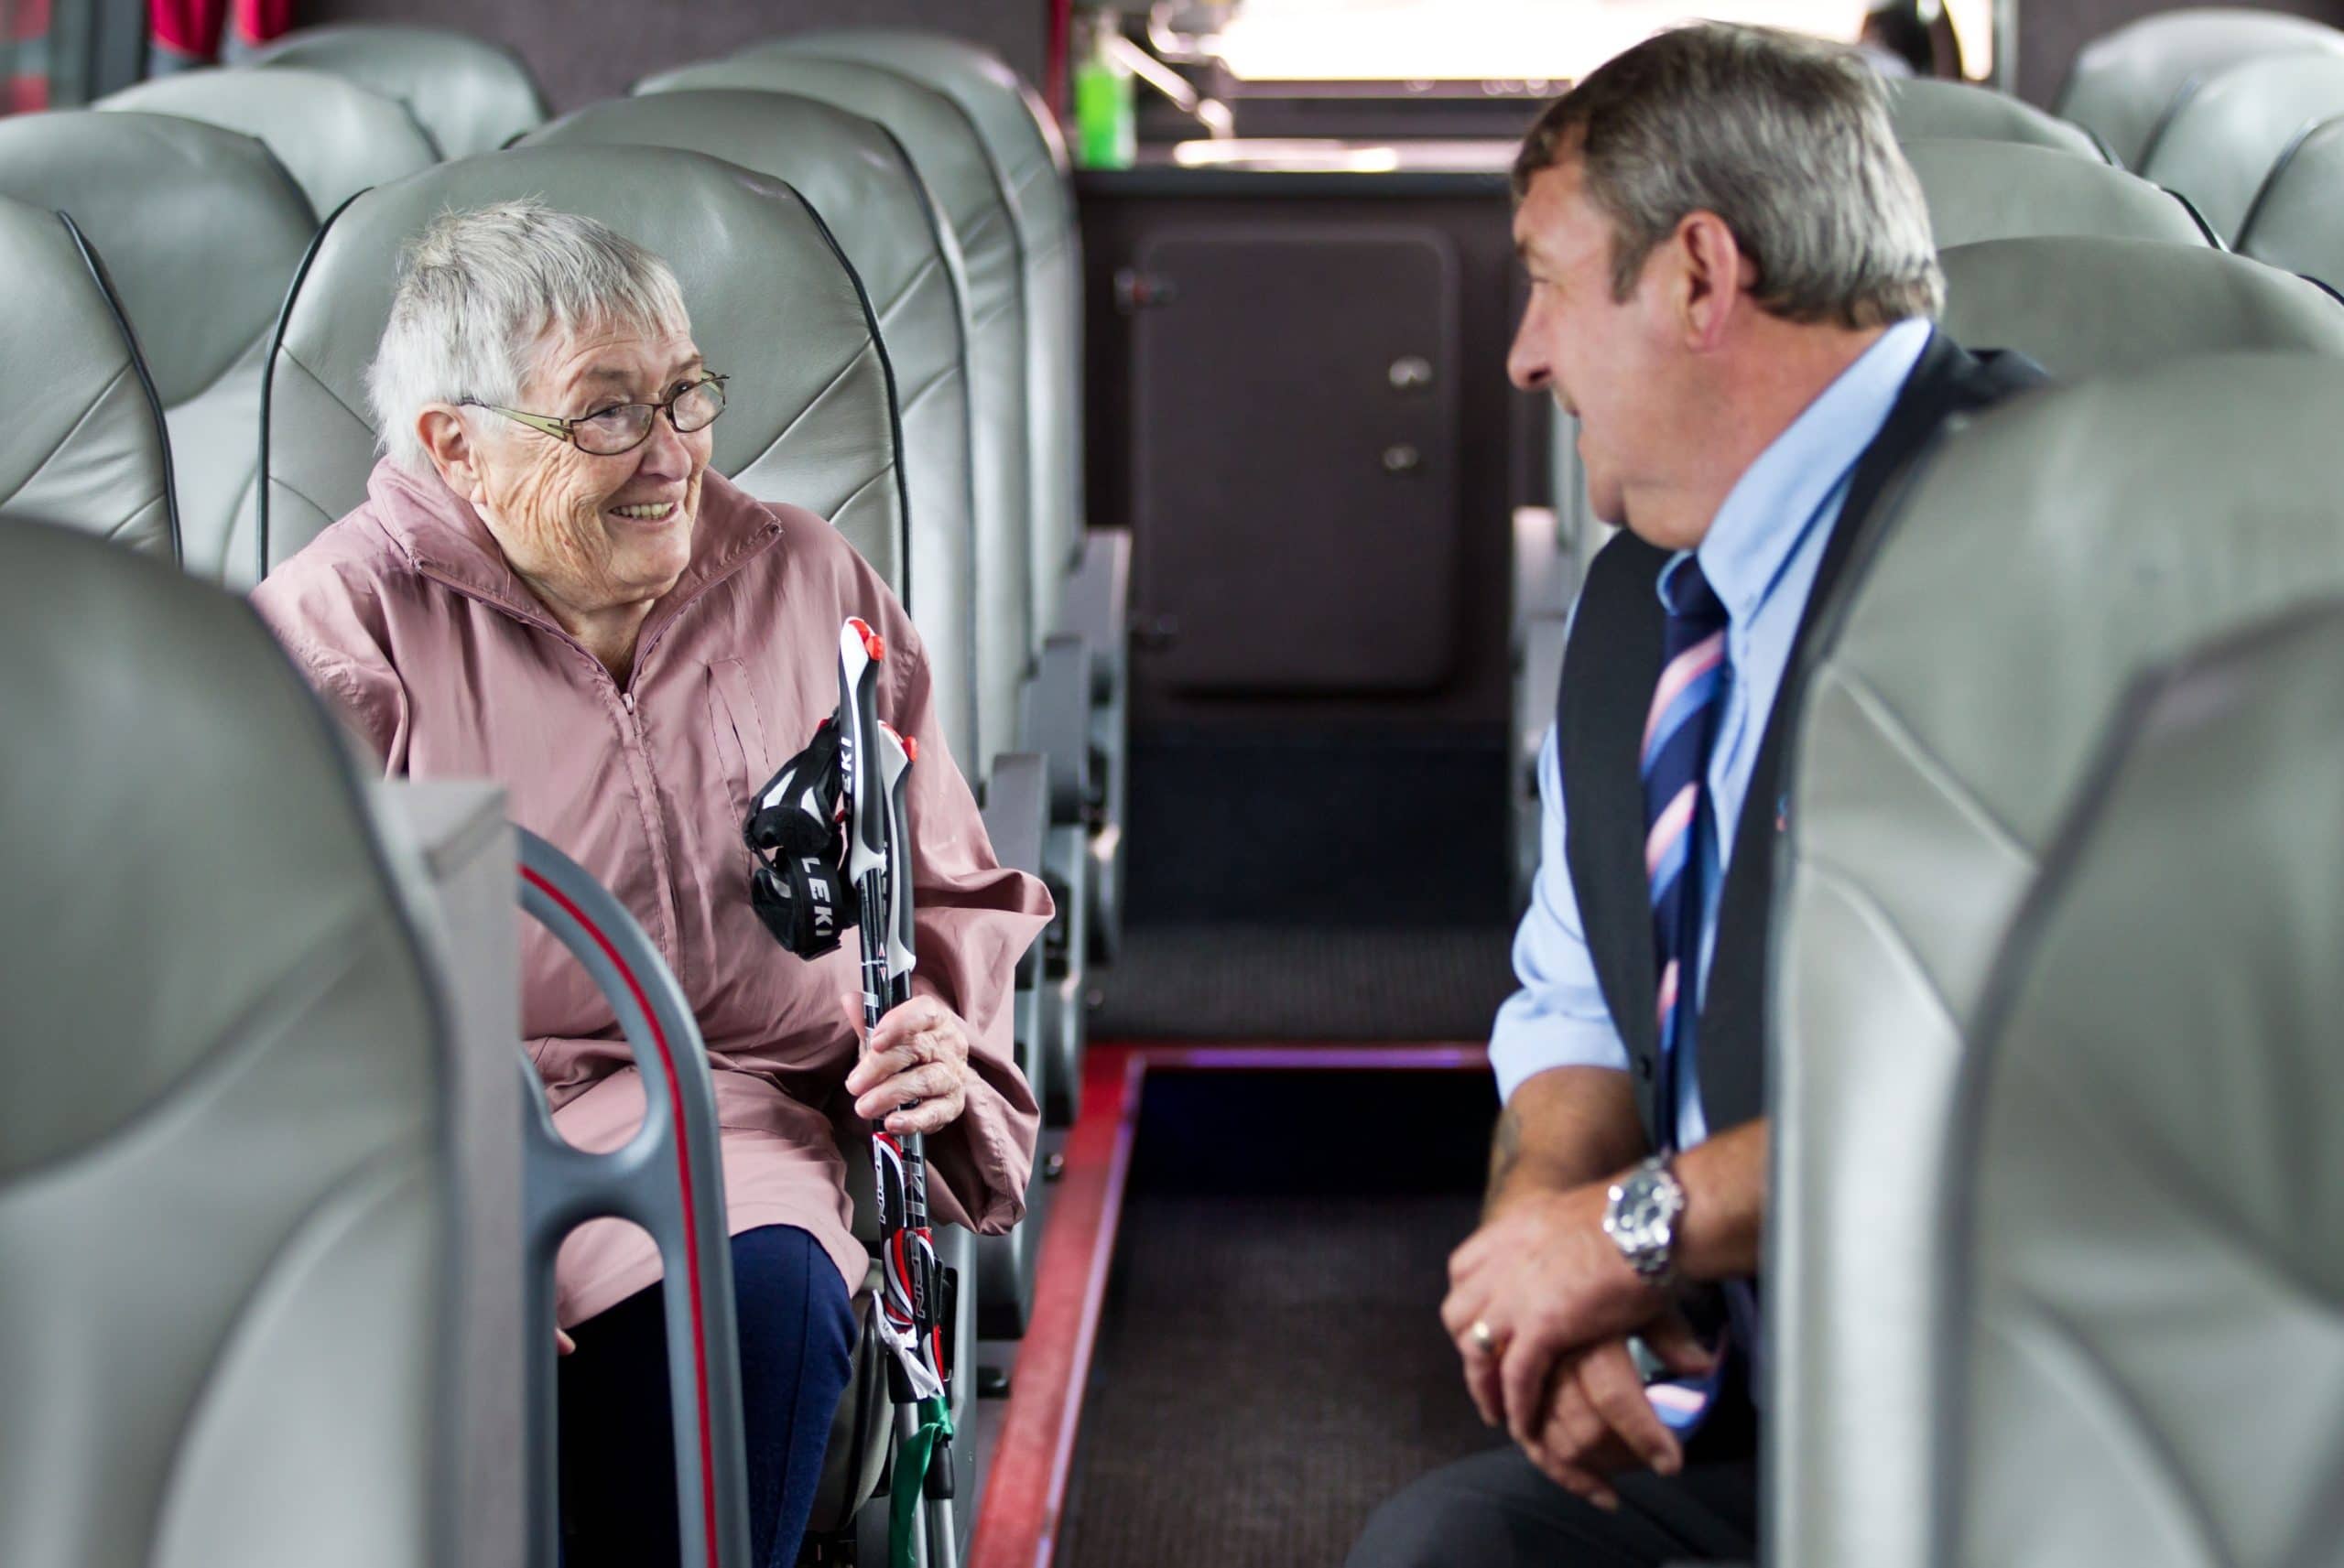 A coach operator must value its people, says contributor